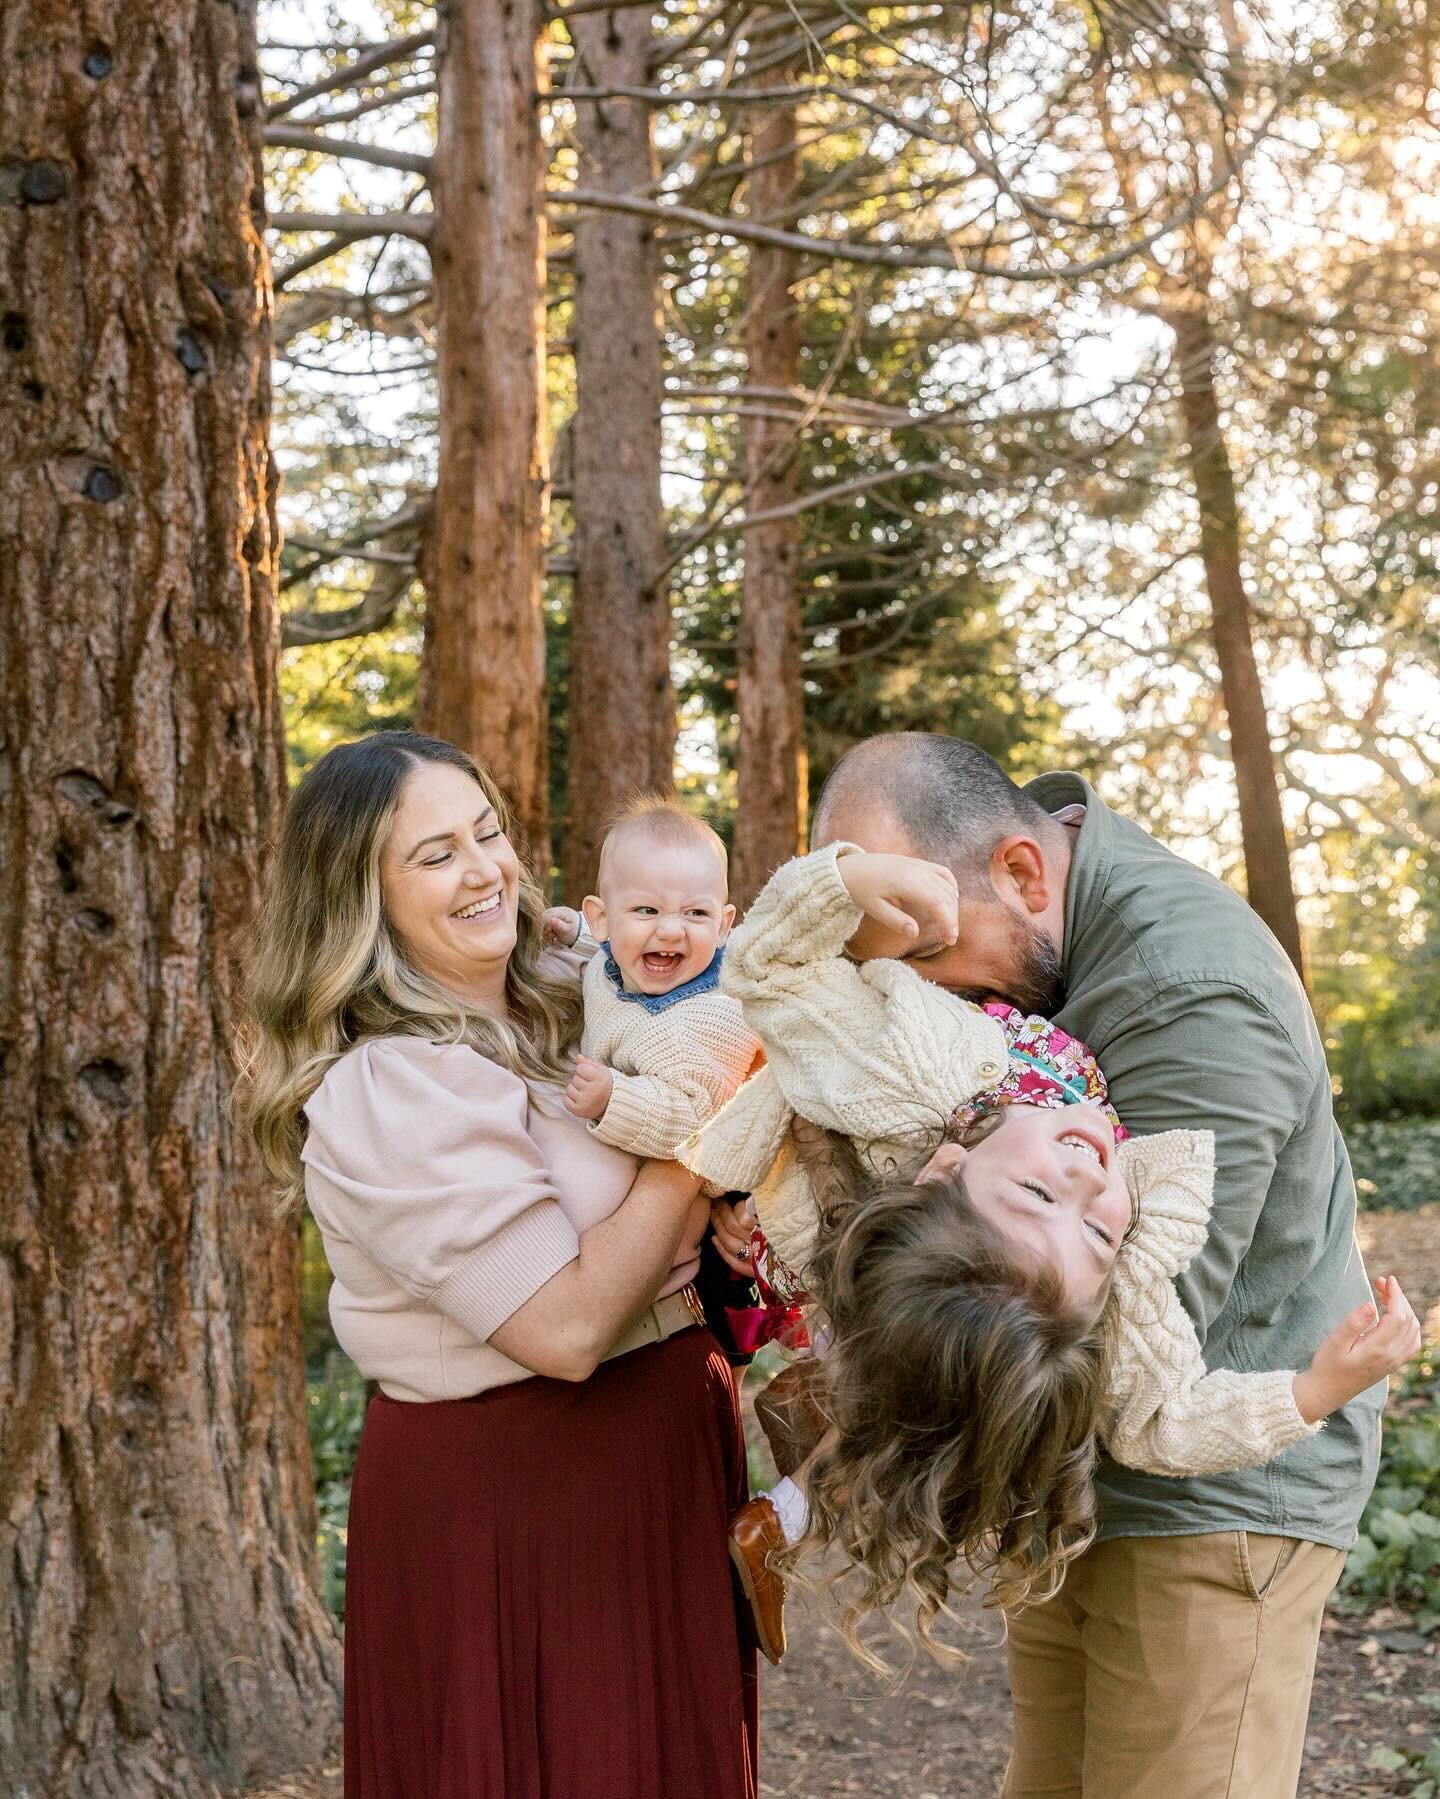 It is such an honor to be photographing this family for so many years and meeting their new little member ( look at those teeth!!) is even better!

Sometimes I remember that this is my work, and I can&rsquo;t be more grateful and lucky to be able to 